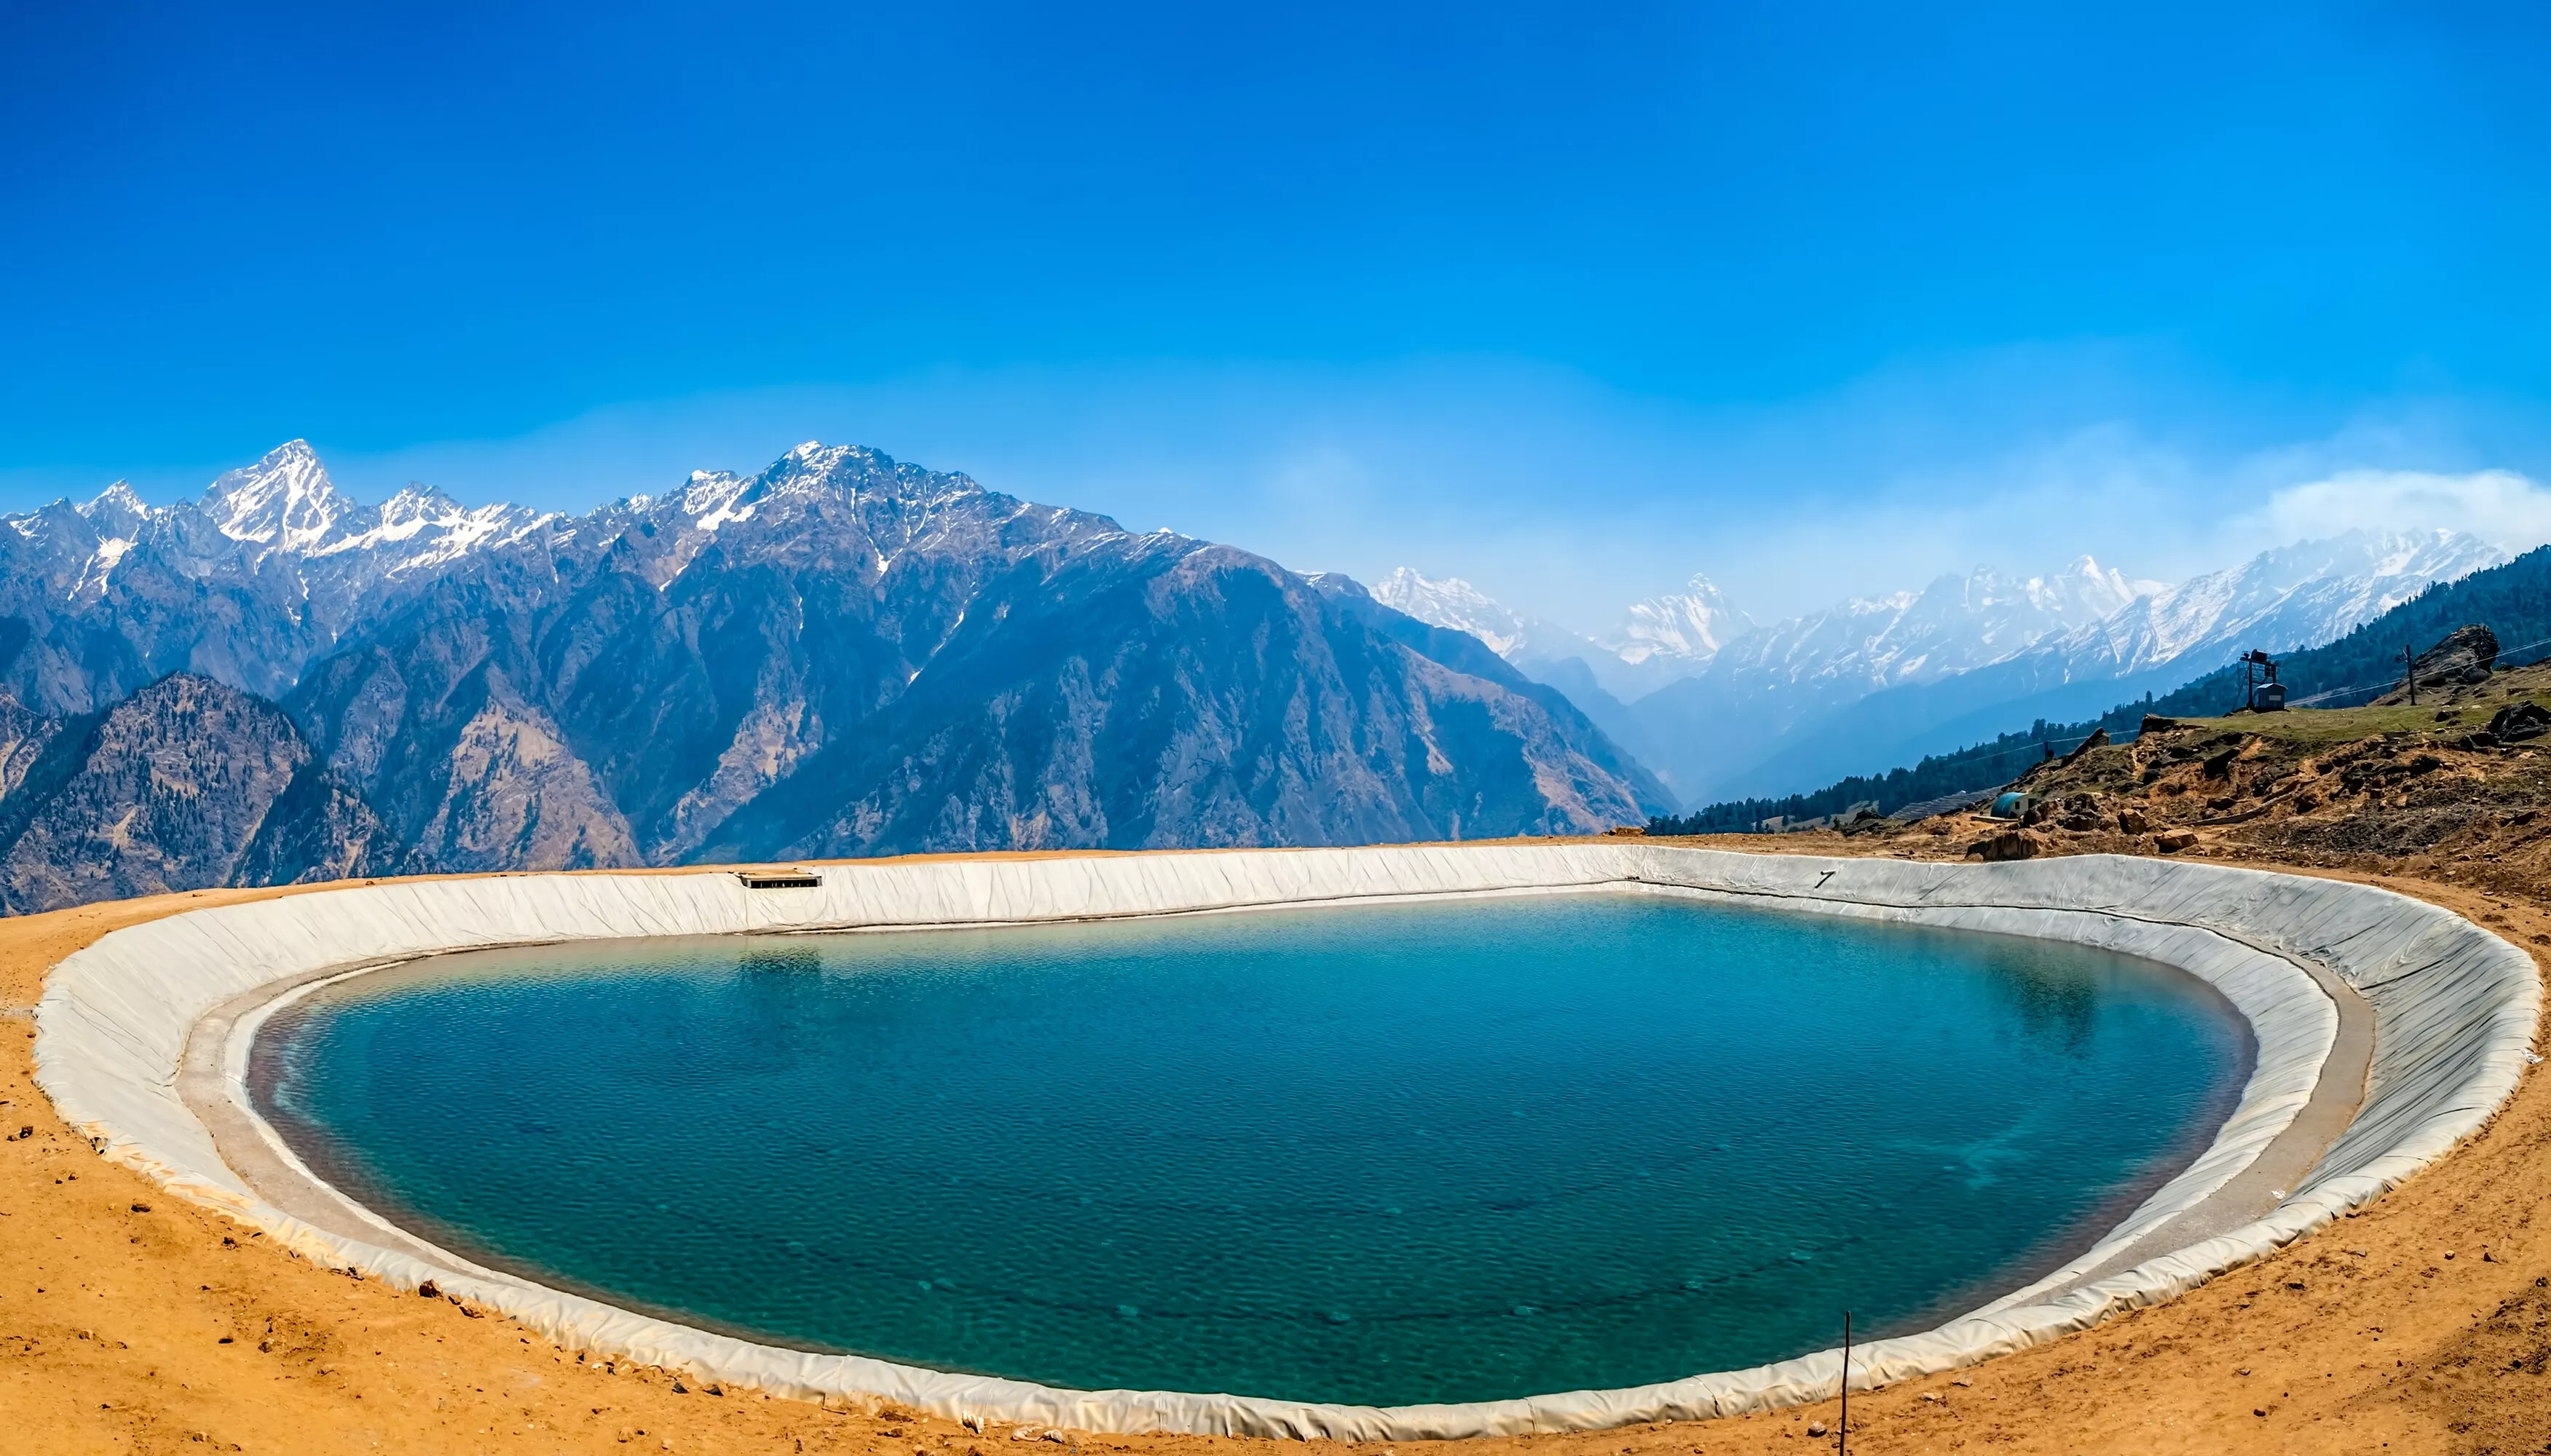 Auli Lake in India, Central Asia | Lakes,Swimming - Rated 3.9